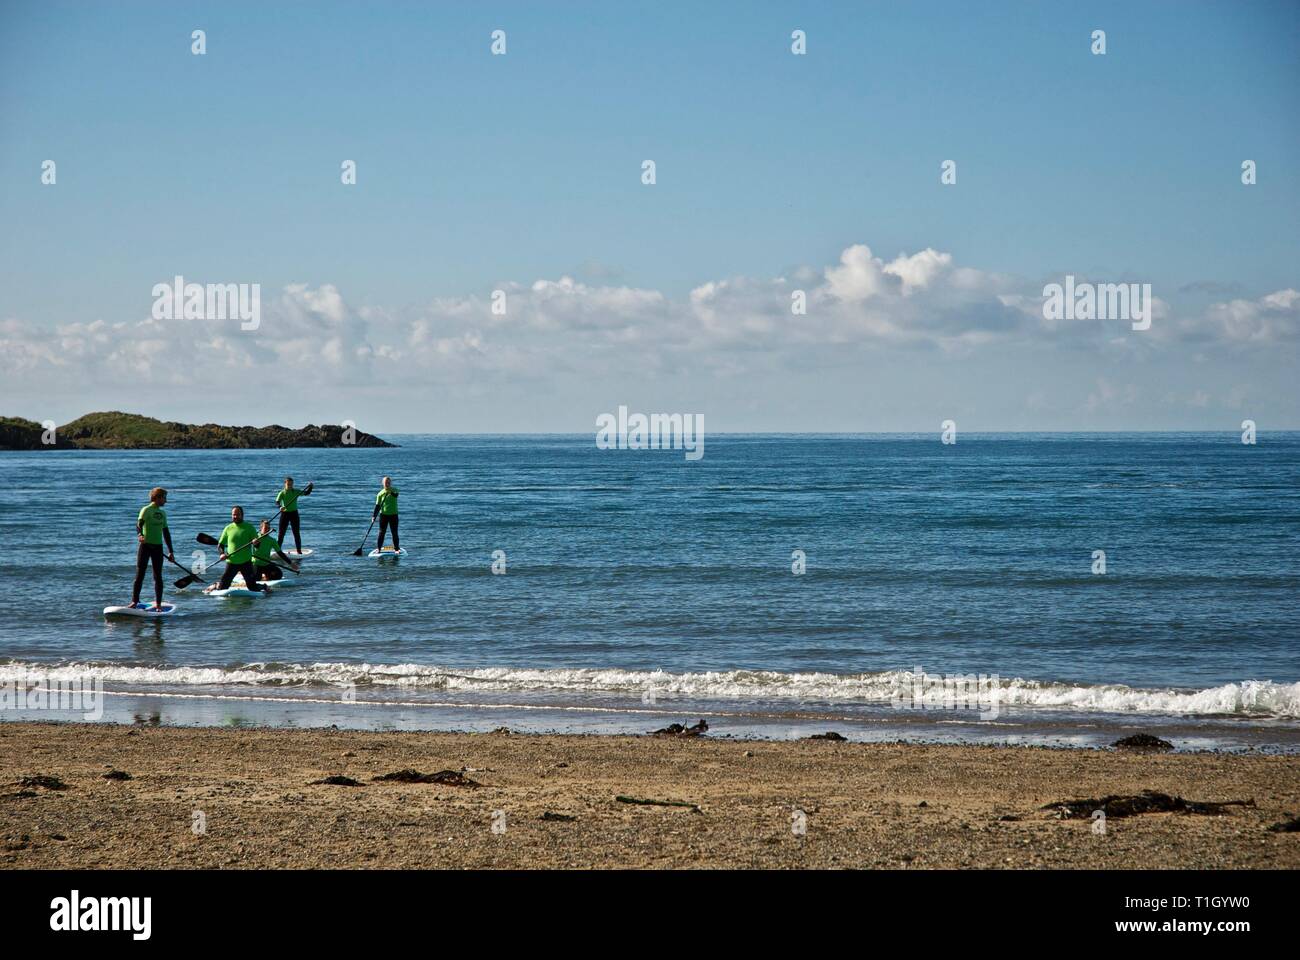 Distant figures approach the beach on paddle boards, Rhosneigr, Anglesey, North Wales, UK Stock Photo